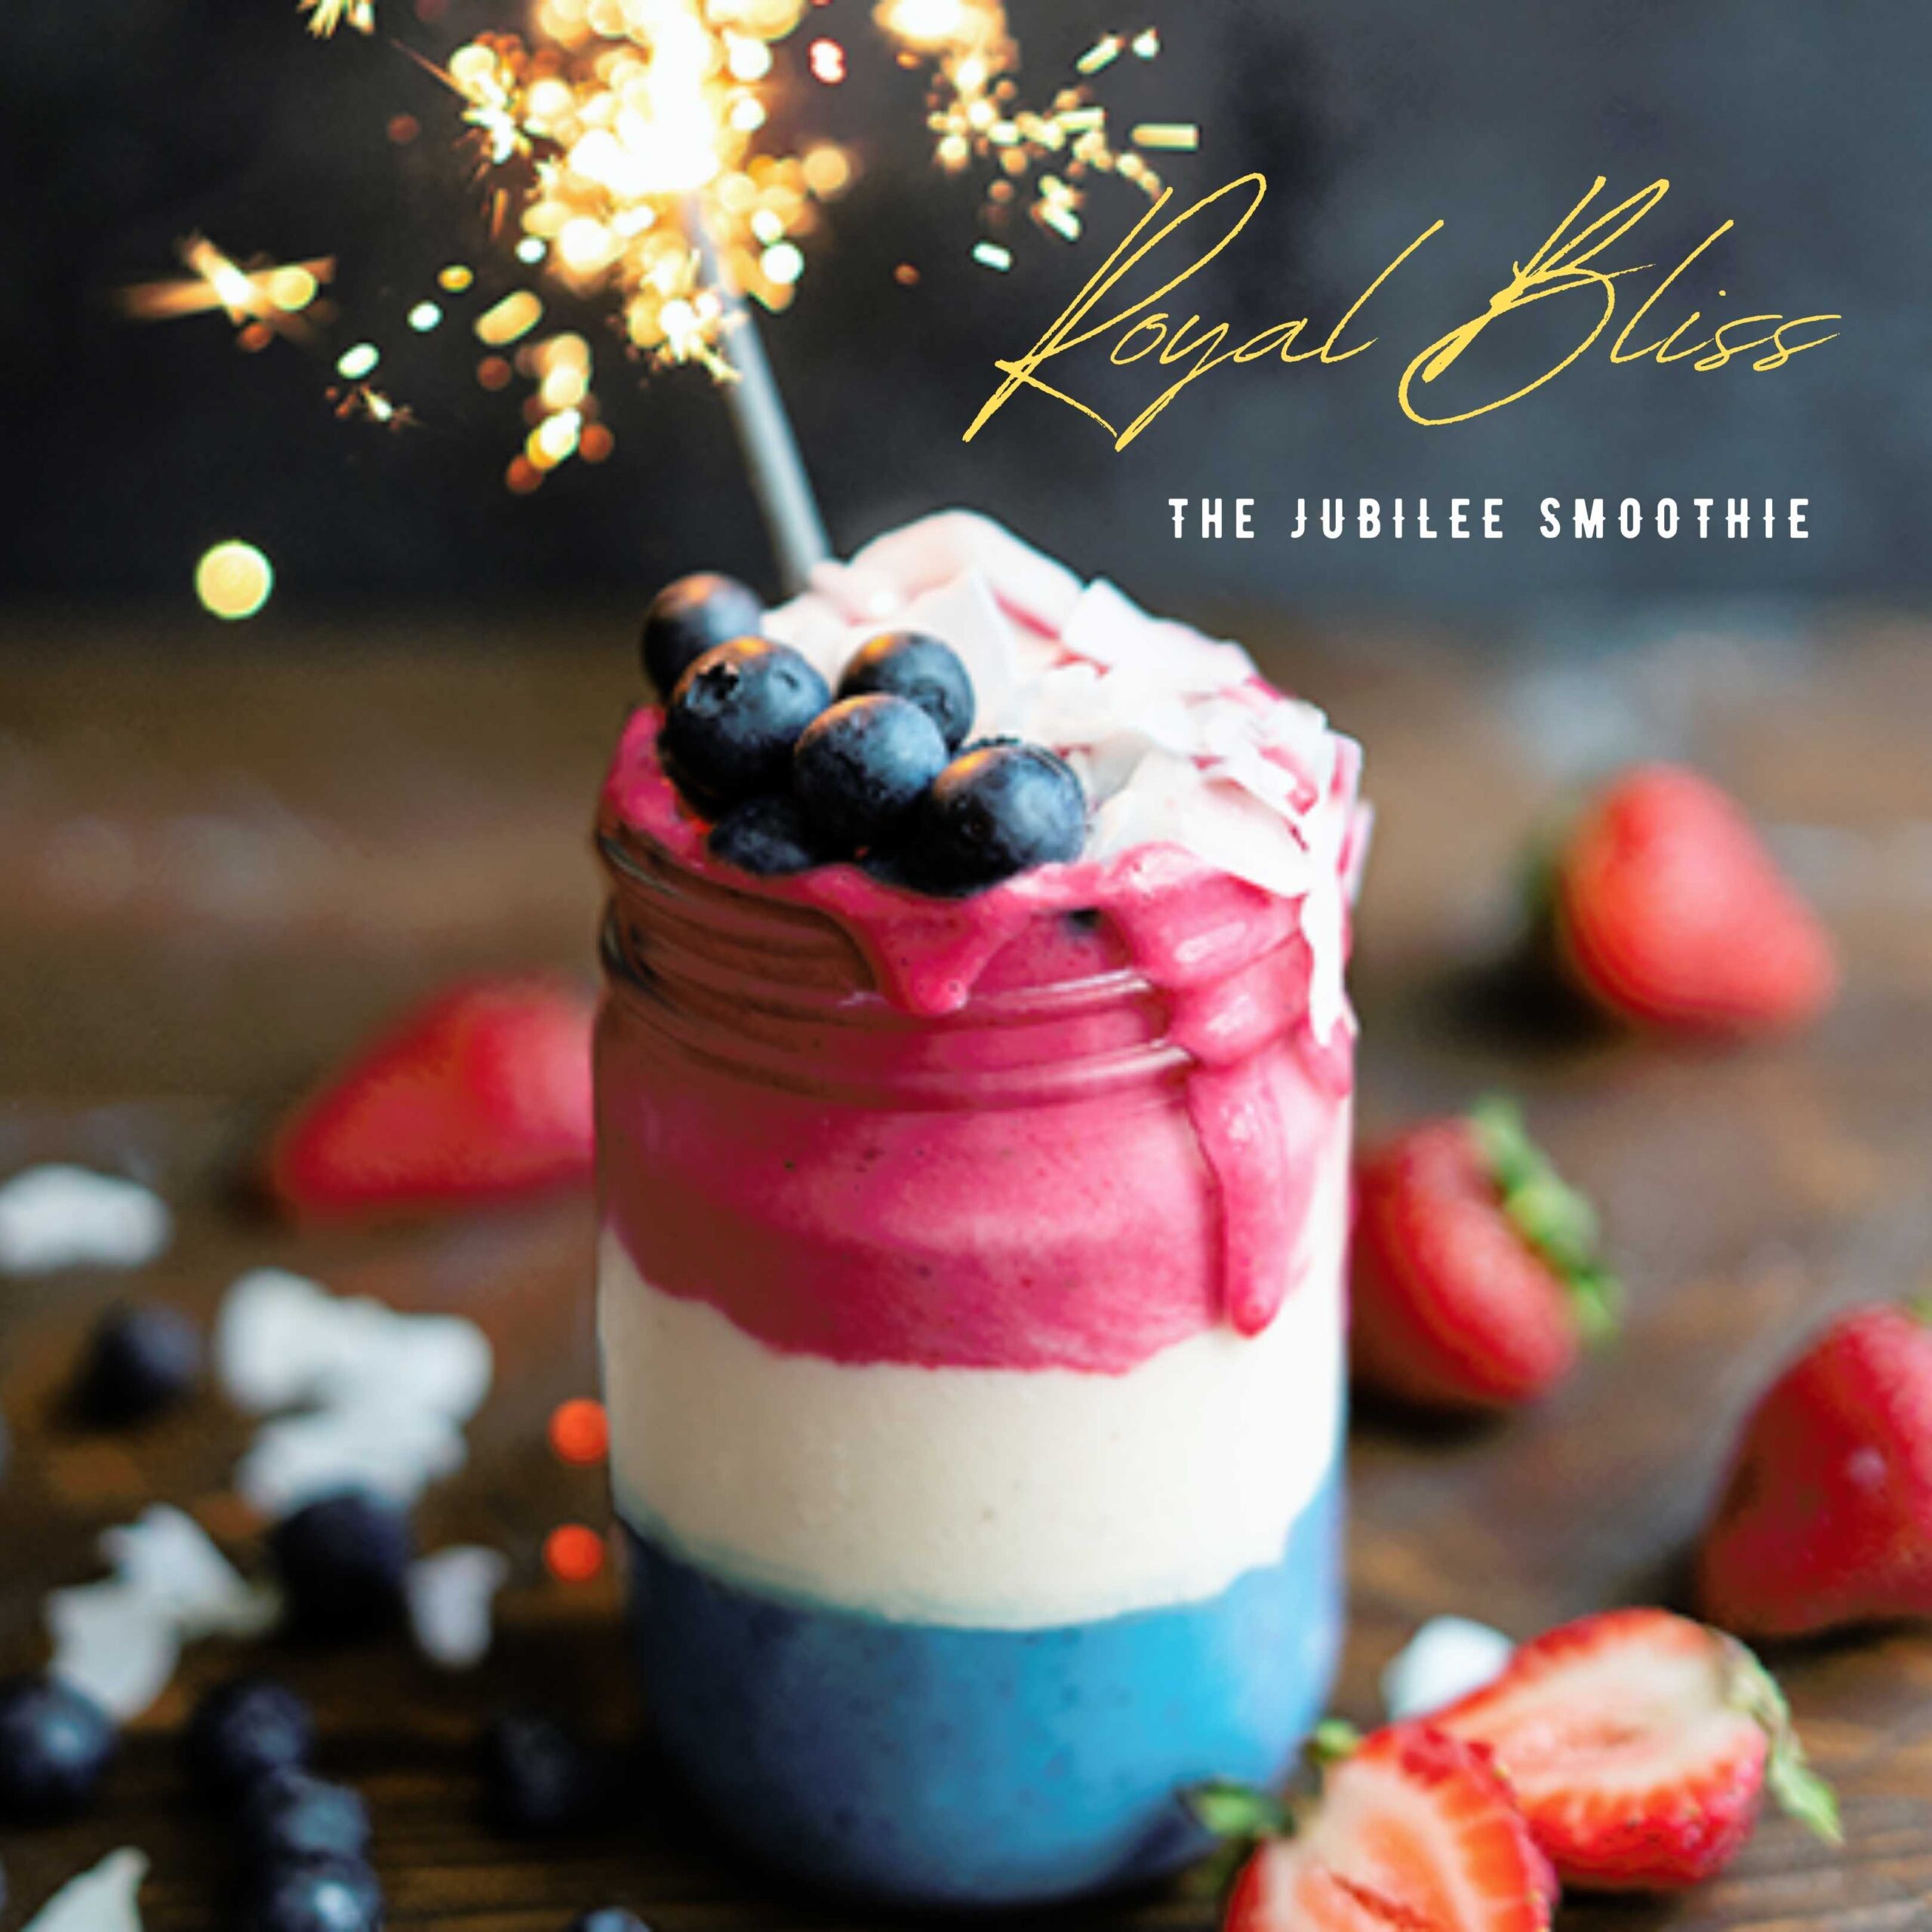 The Jubilee Smoothie